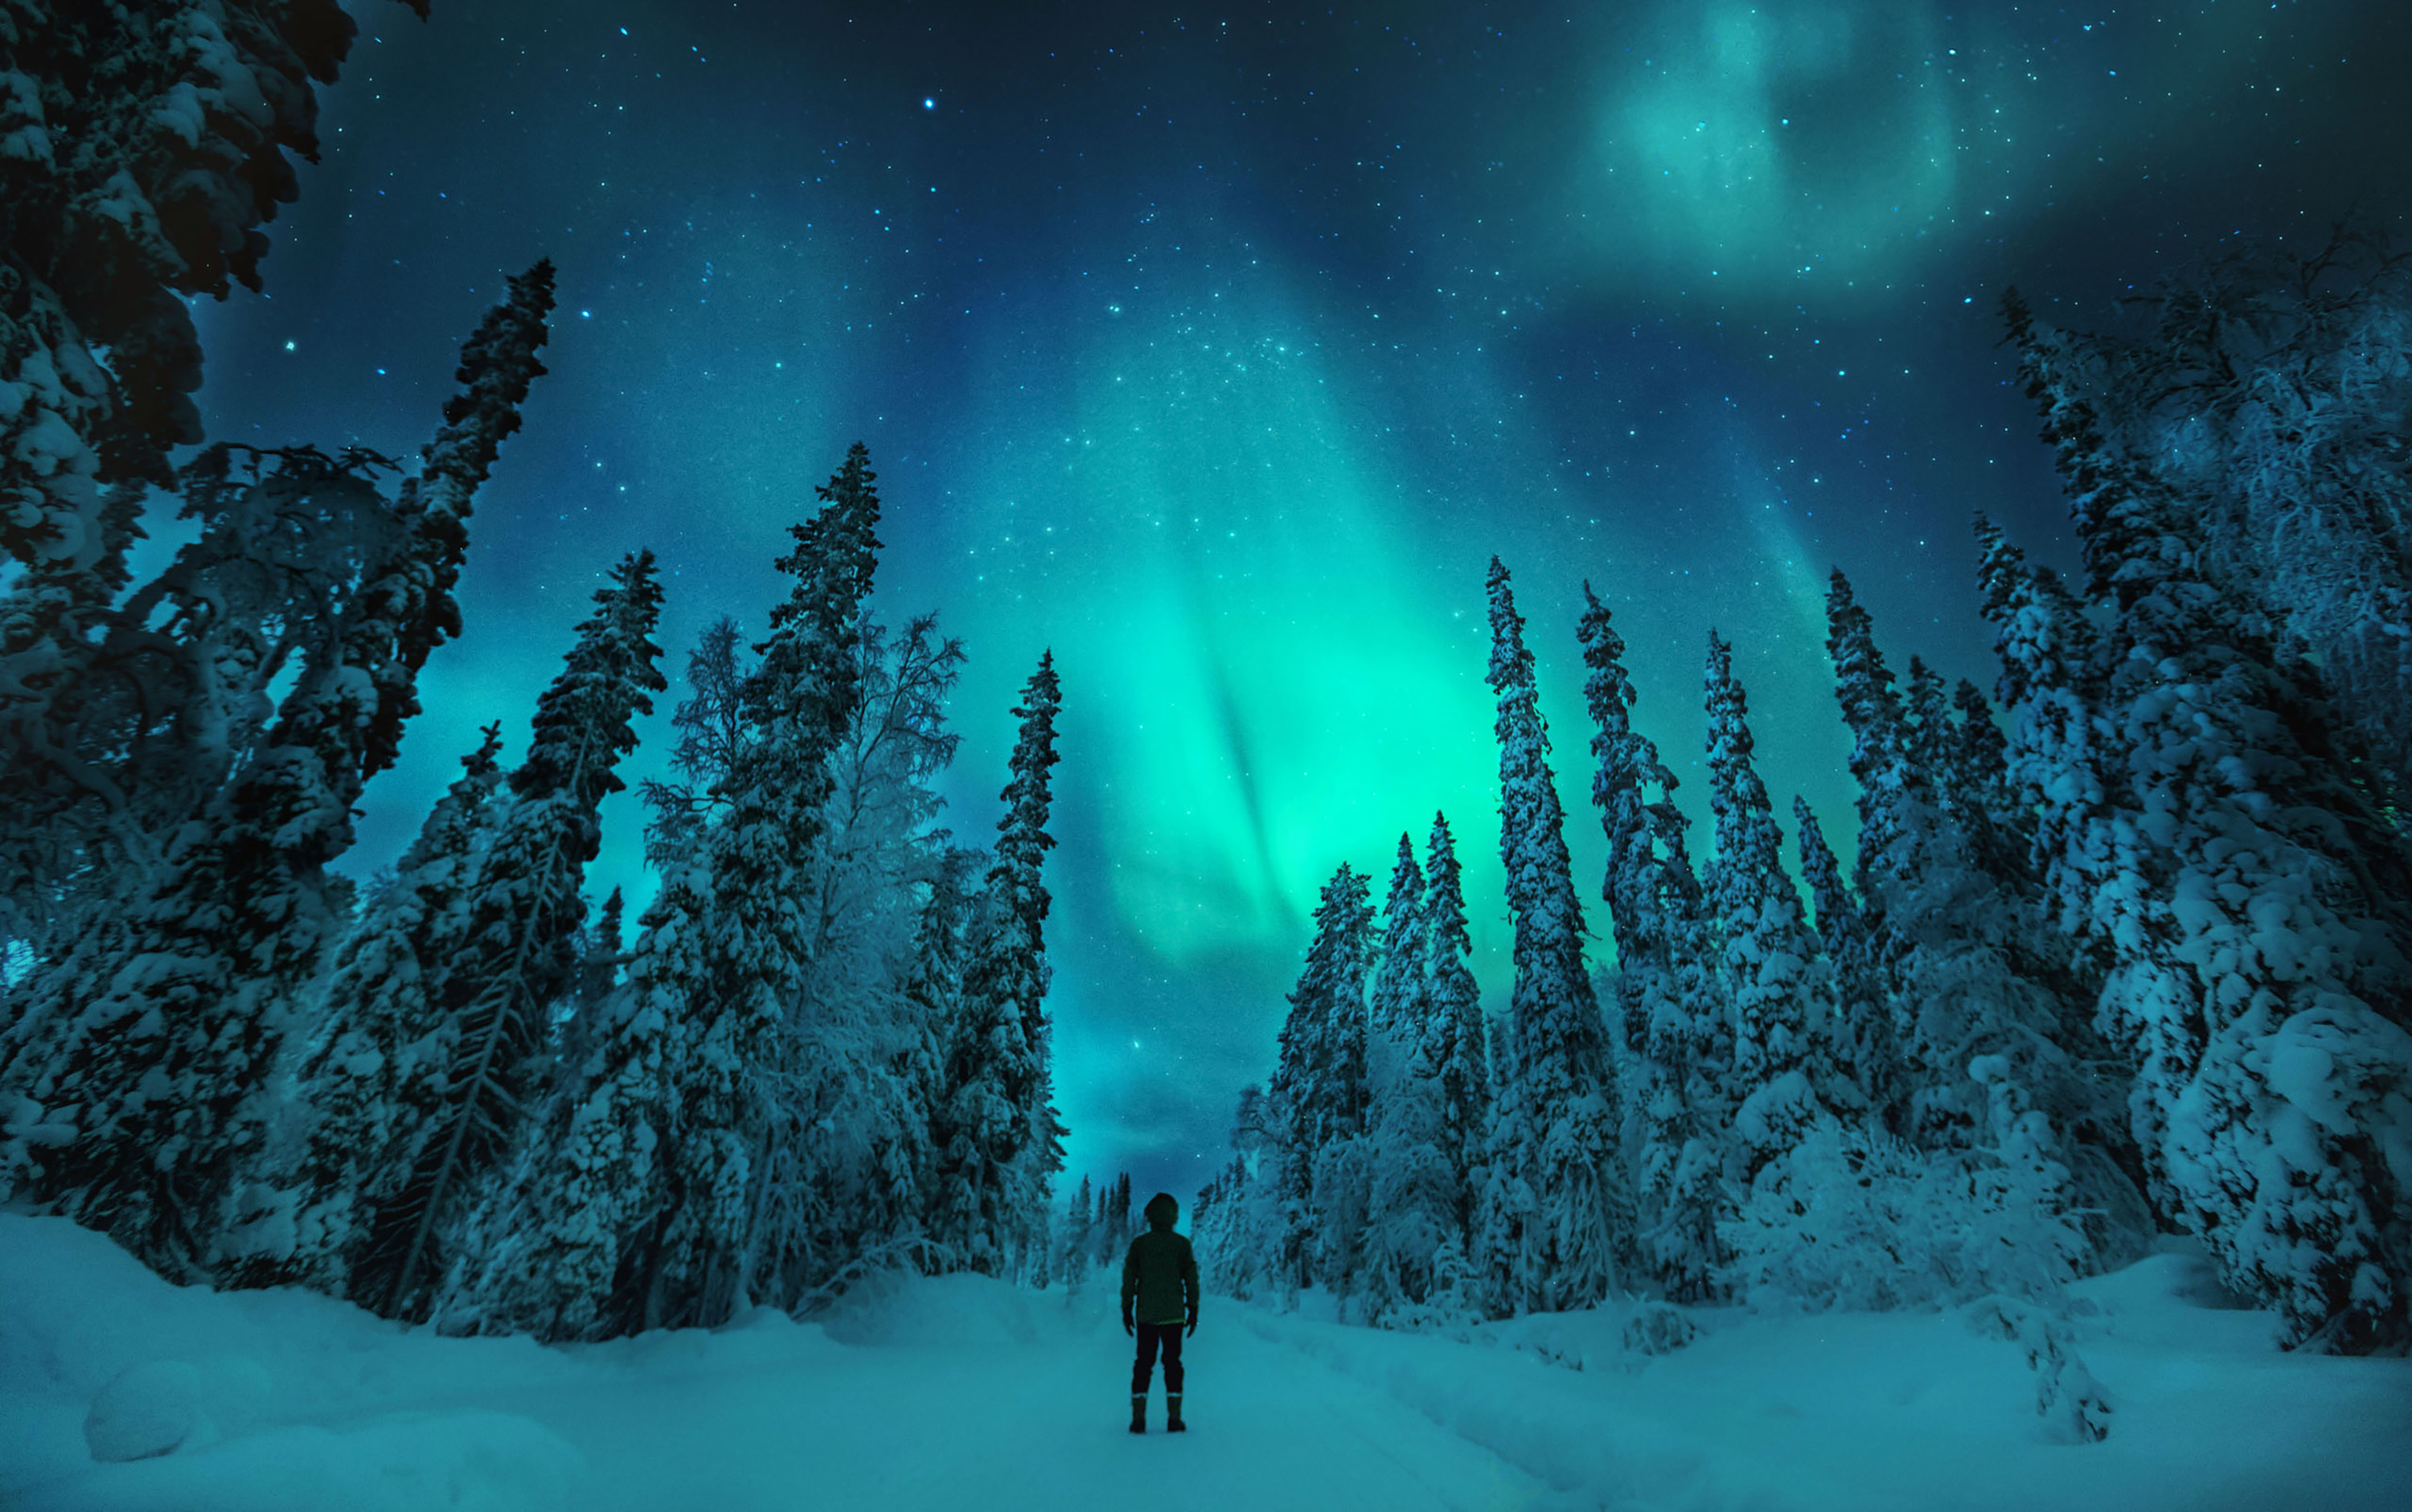 man enjoying the Northern Lights in the snowy wilderness